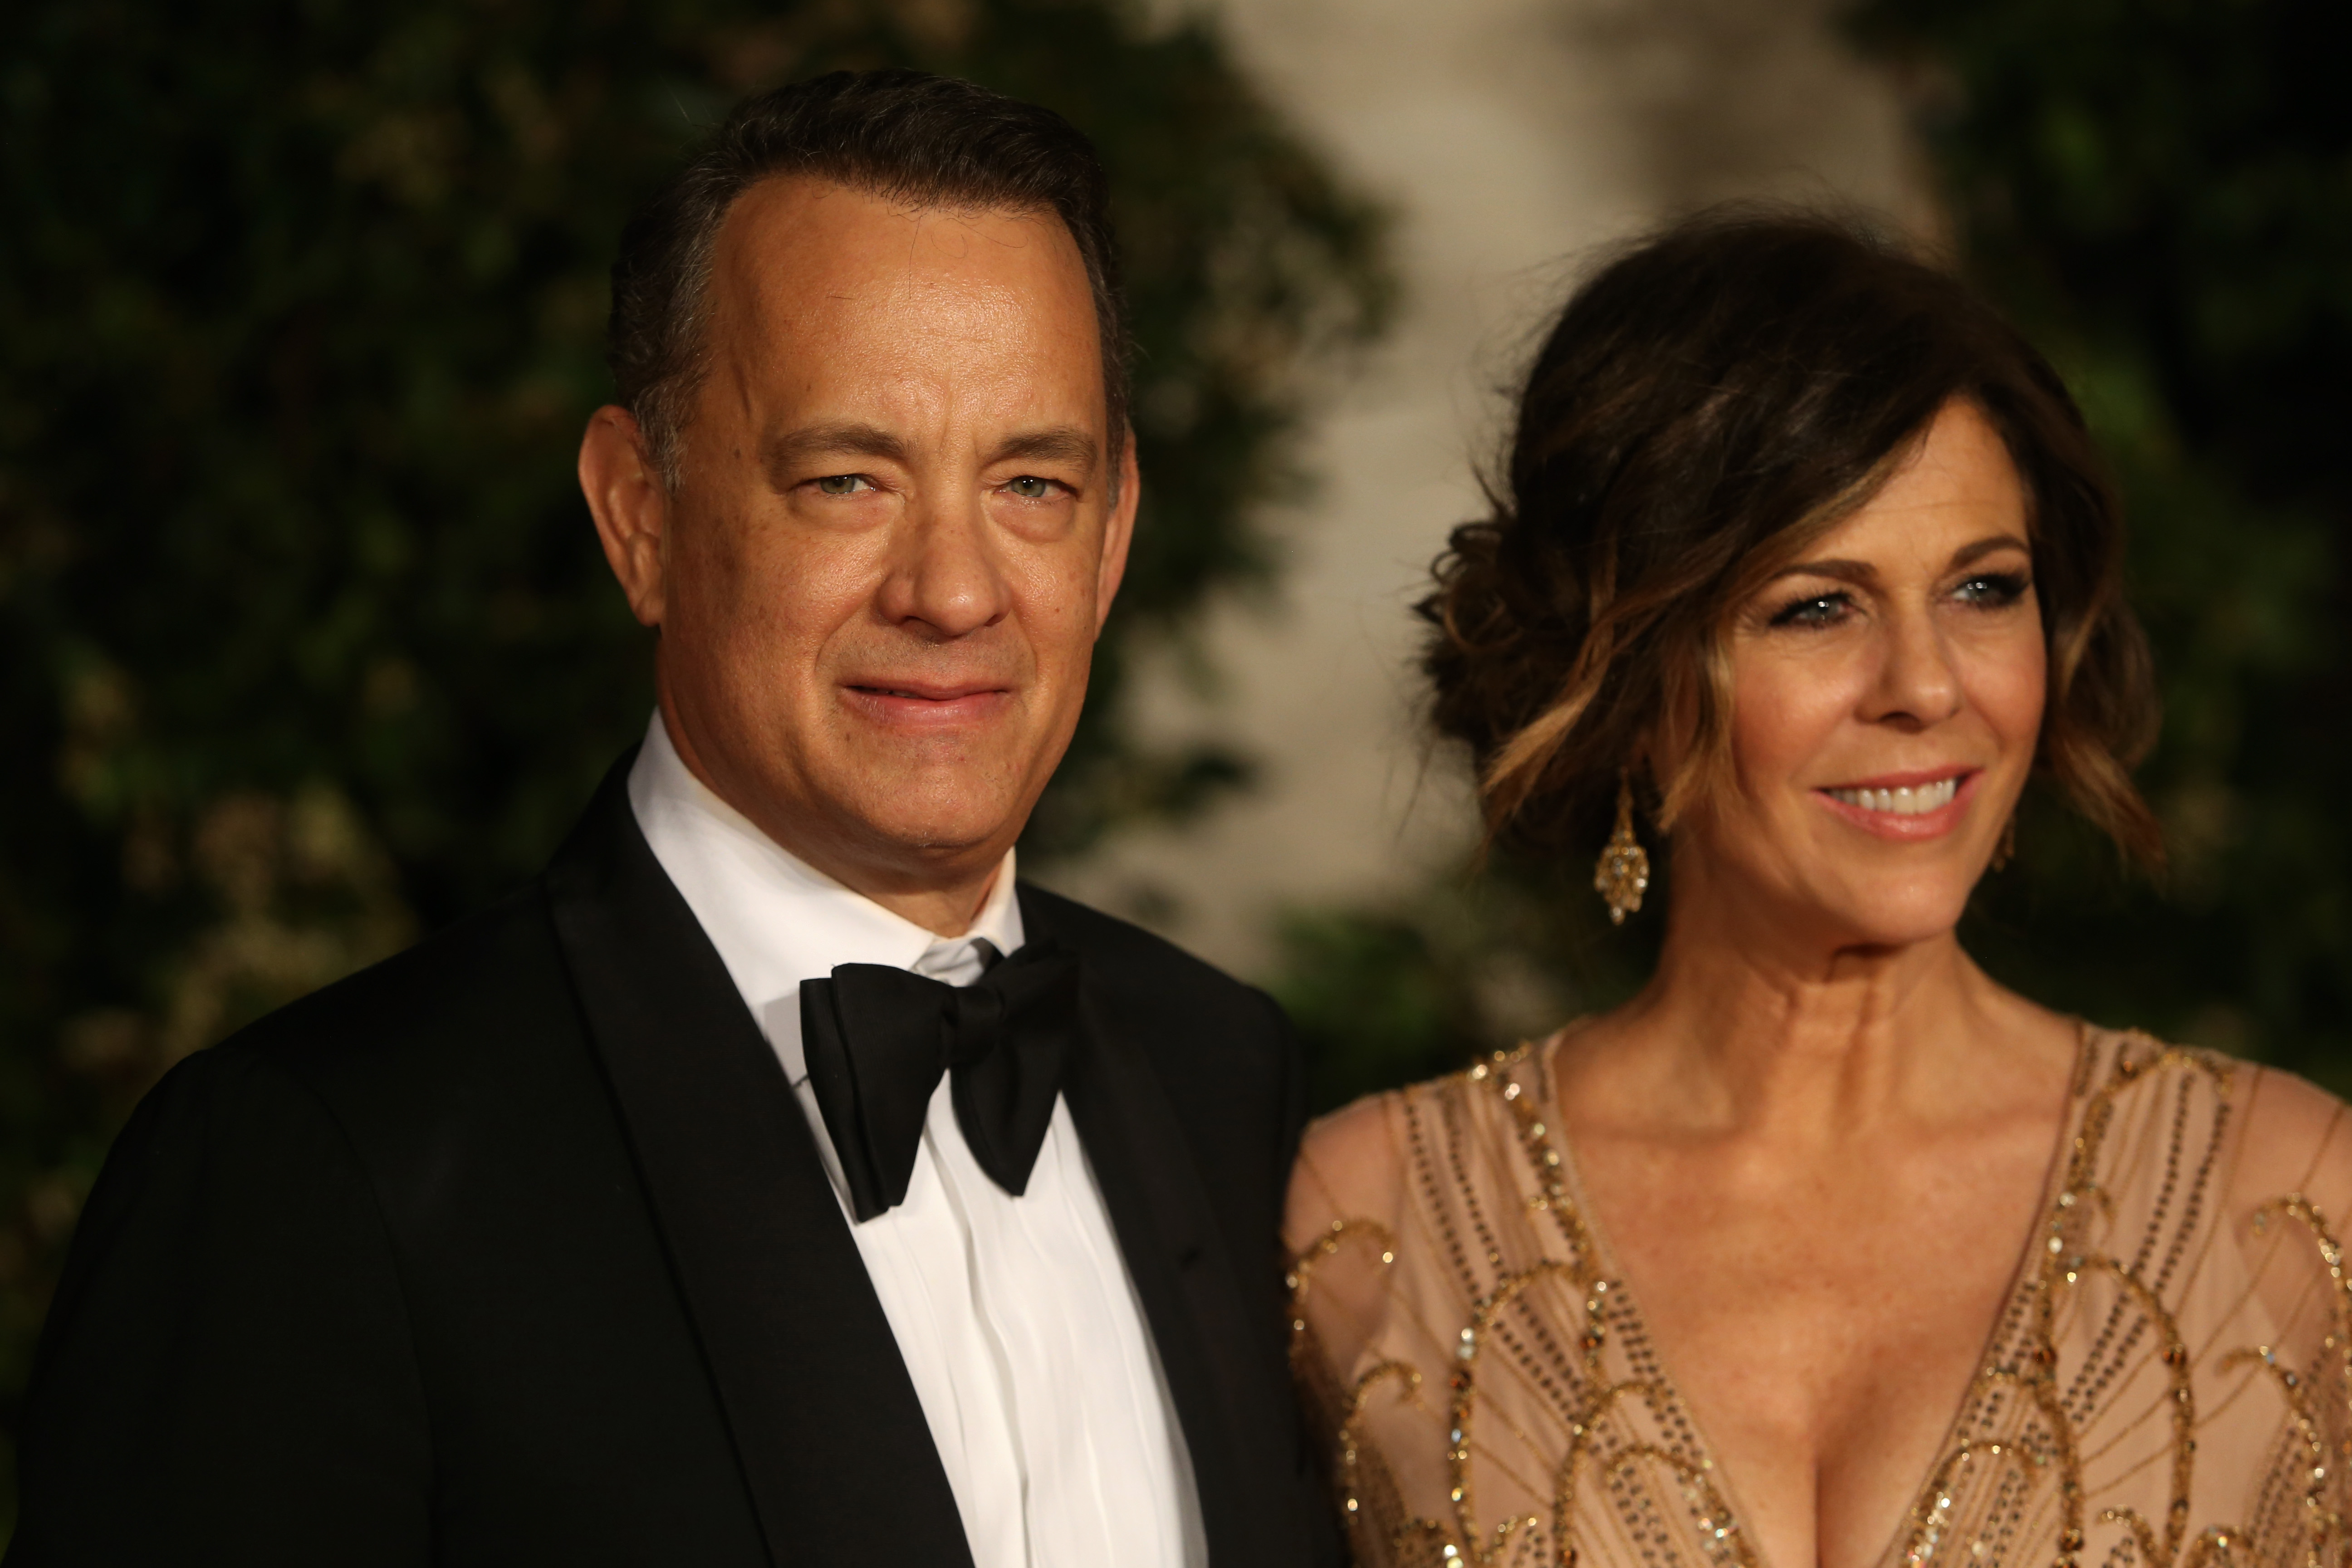 Tom Hanks and Rita Wilson in London, England on February 16, 2014 | Source: Getty Images